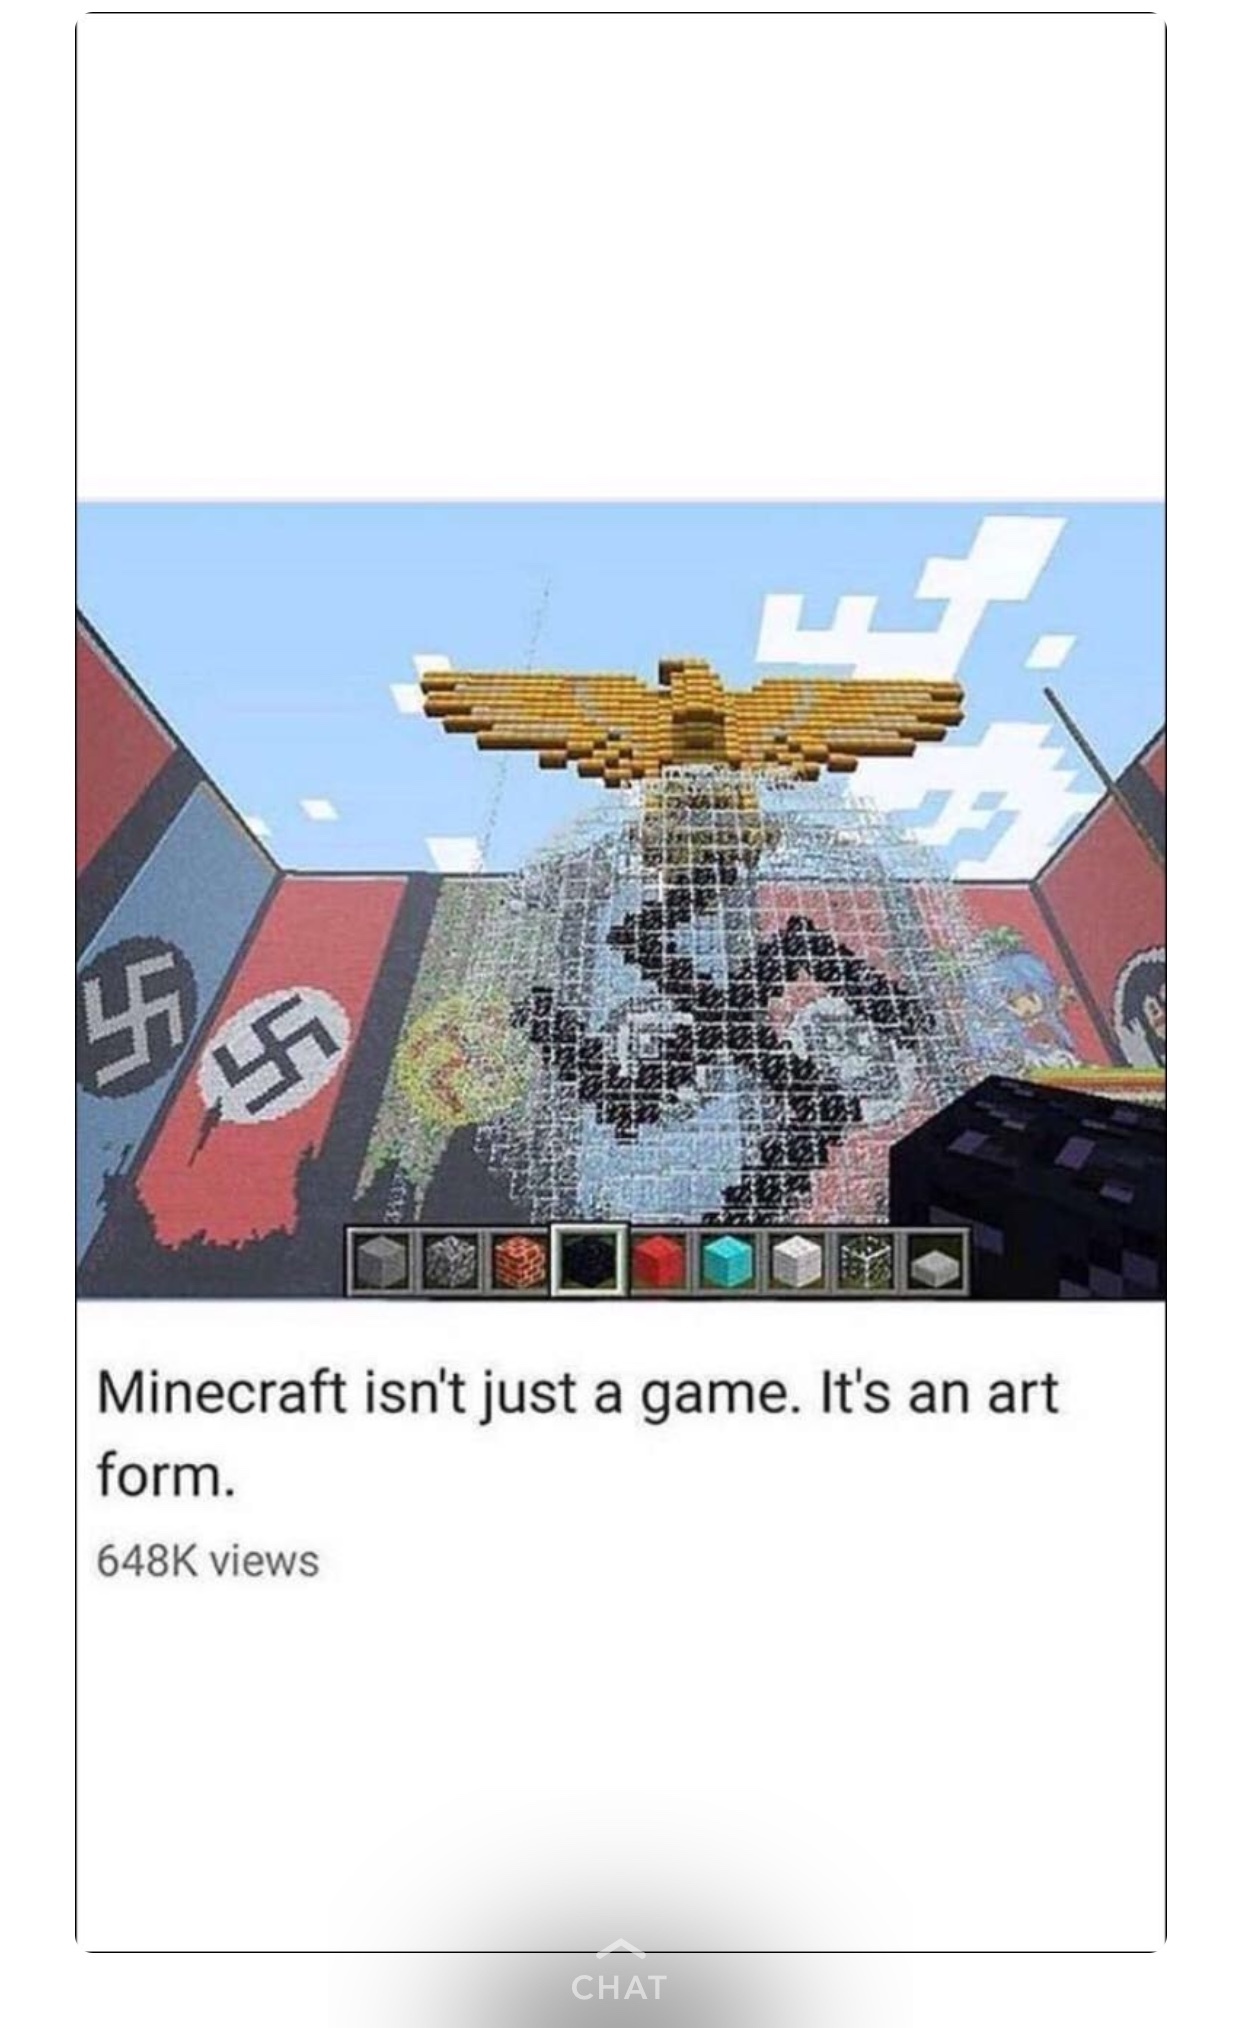 this is what minecraft is used for - meme